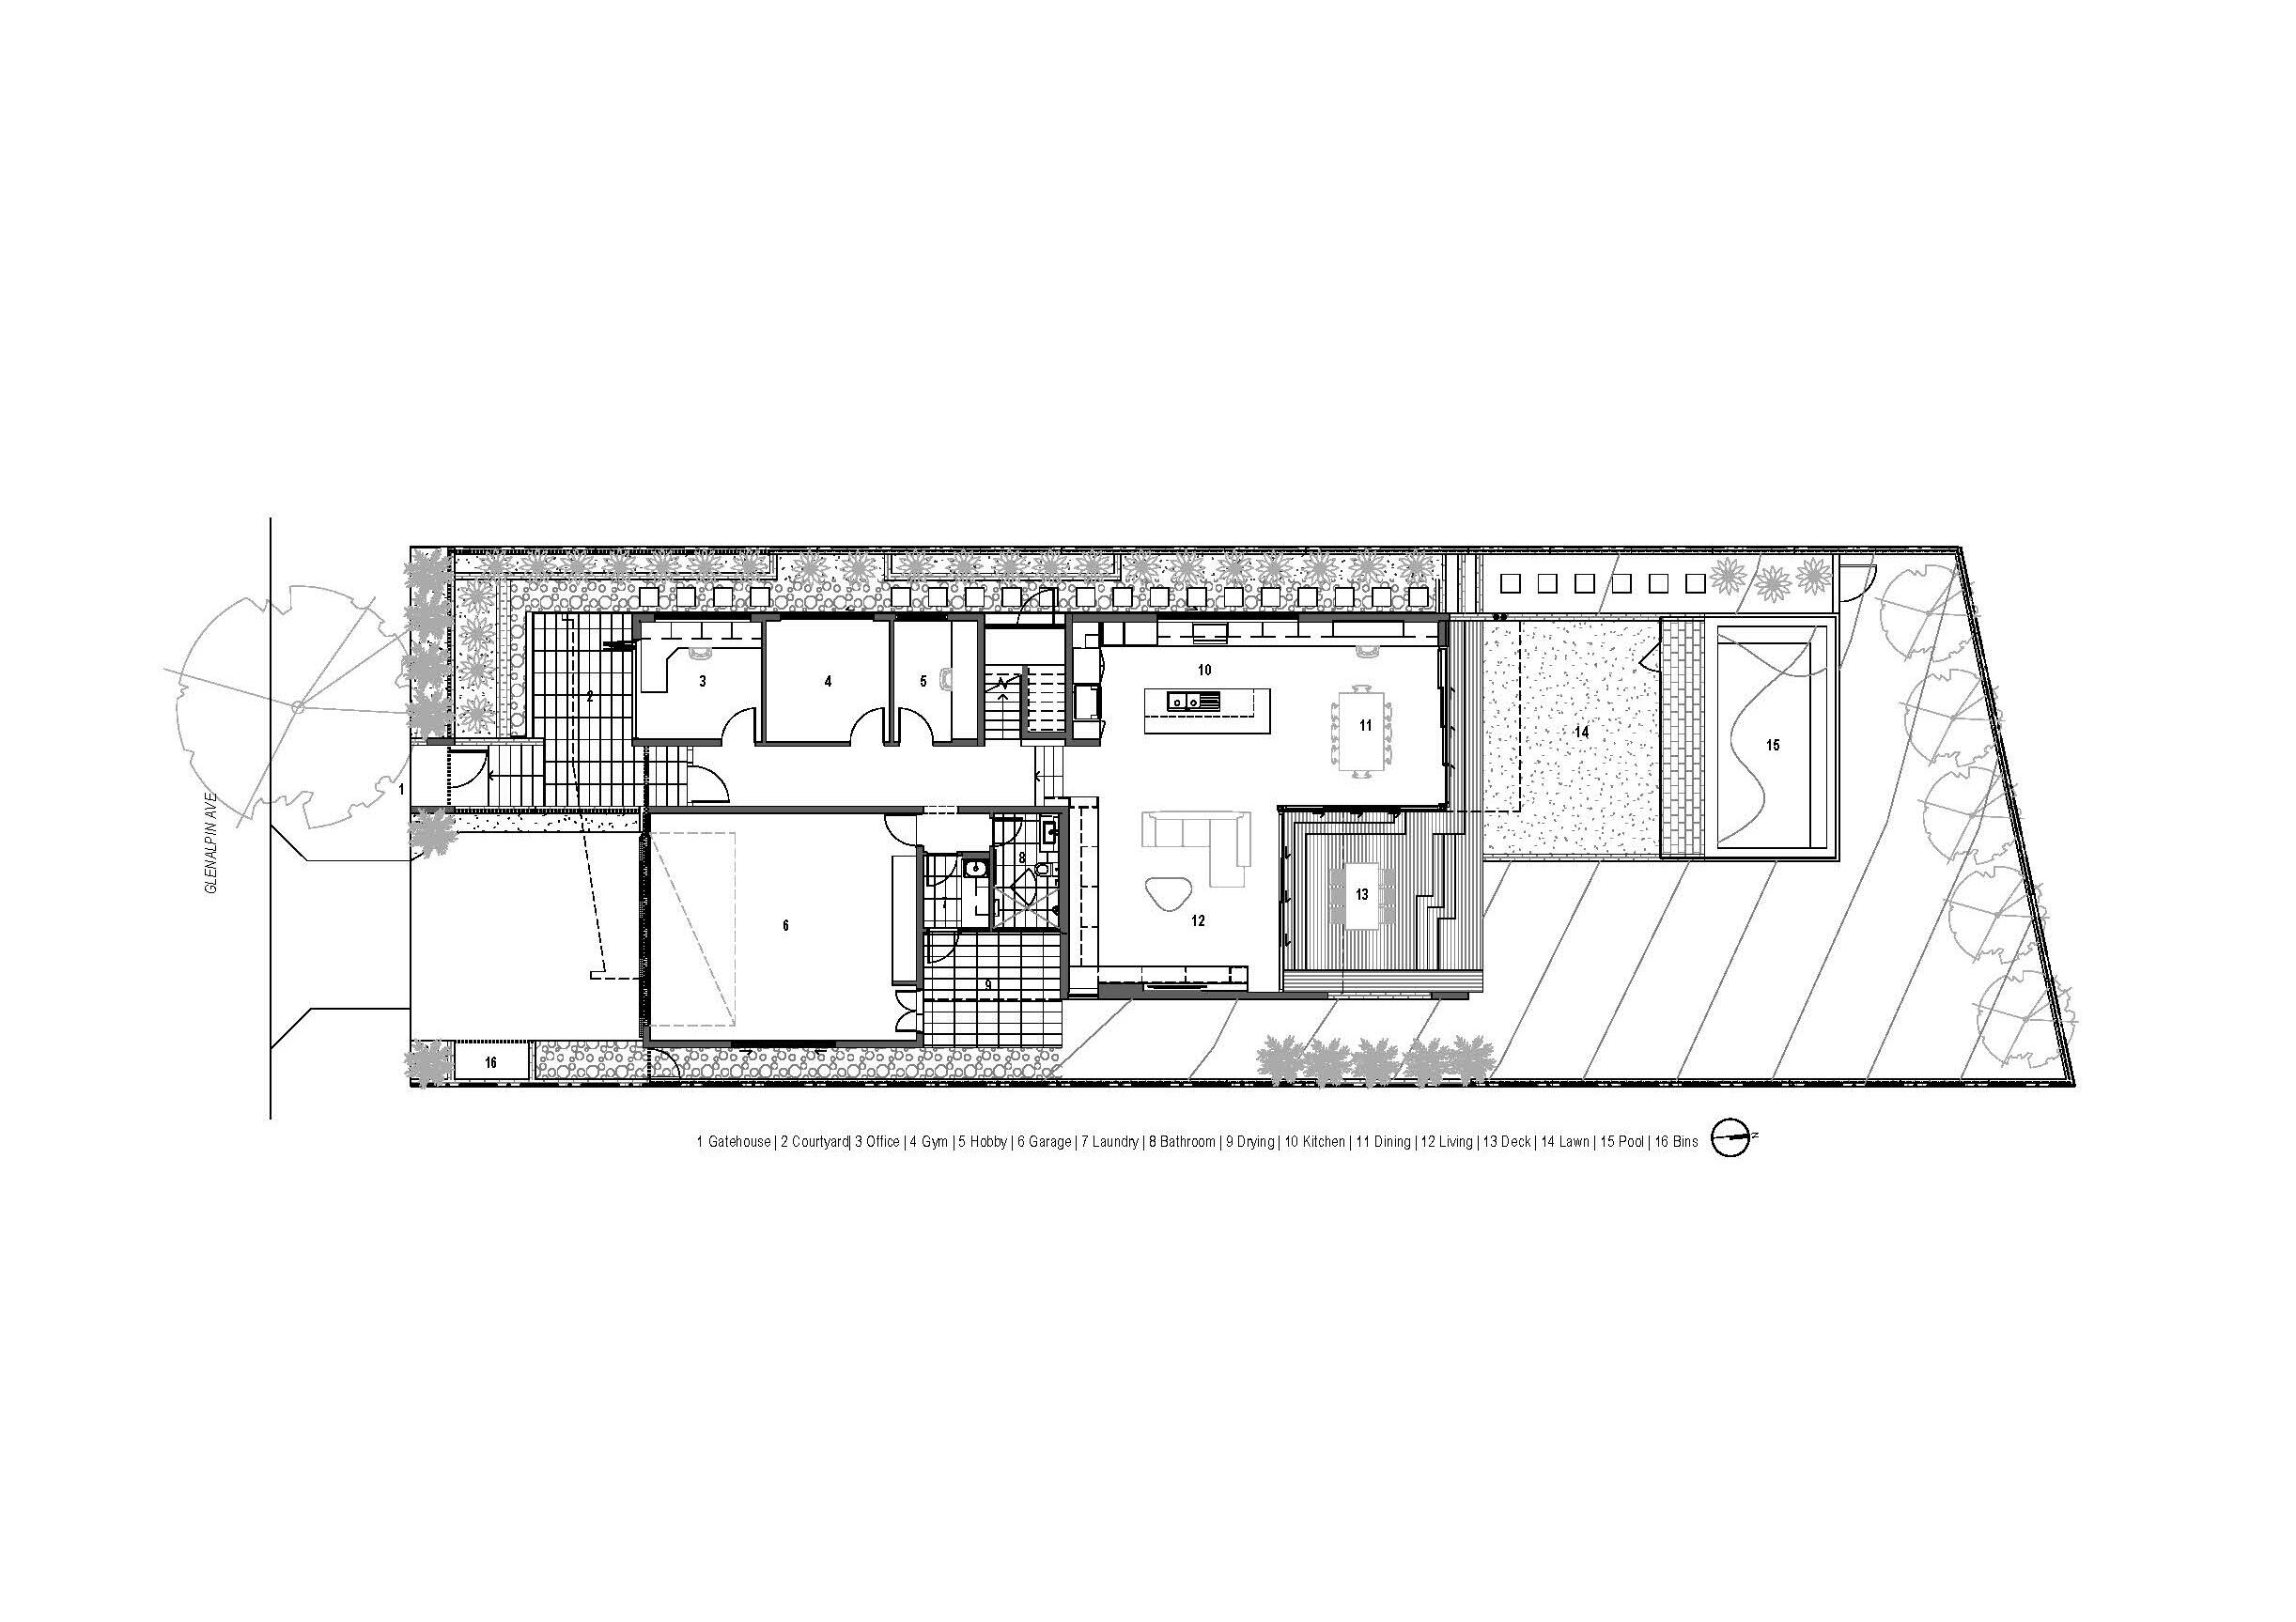 HOUSE 1 PLANS_Page_1.jpg